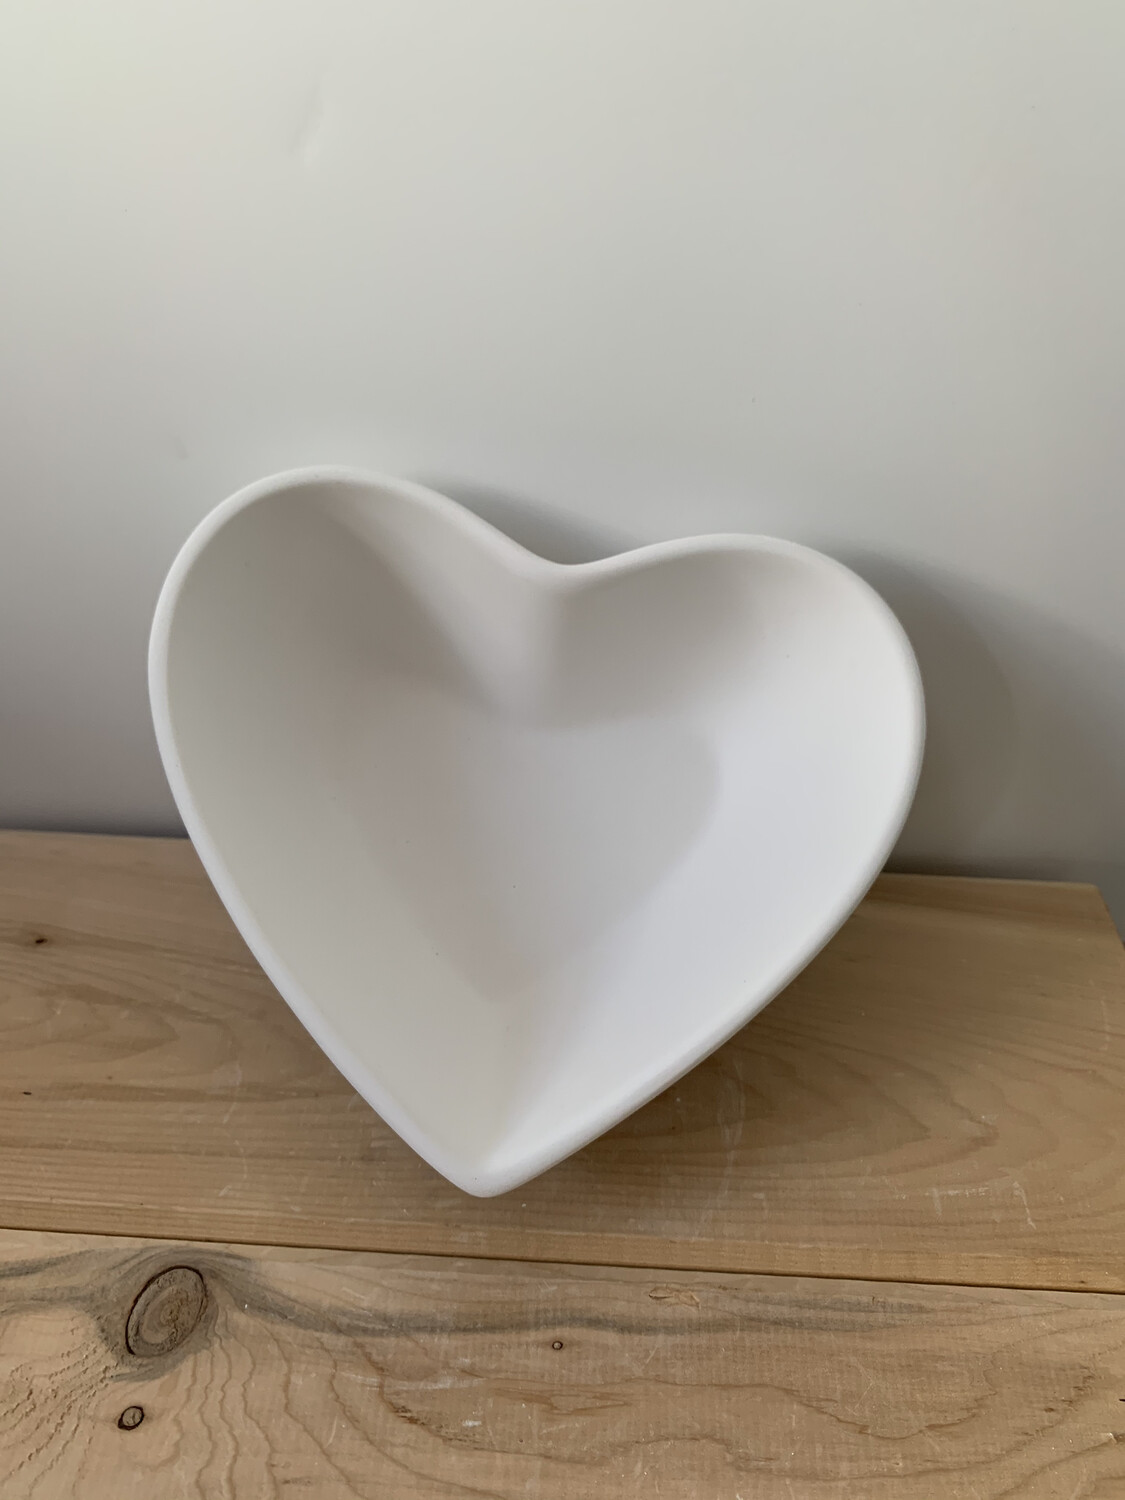 Paint Your Own Pottery - Ceramic
Heart Bowl Painting Kit